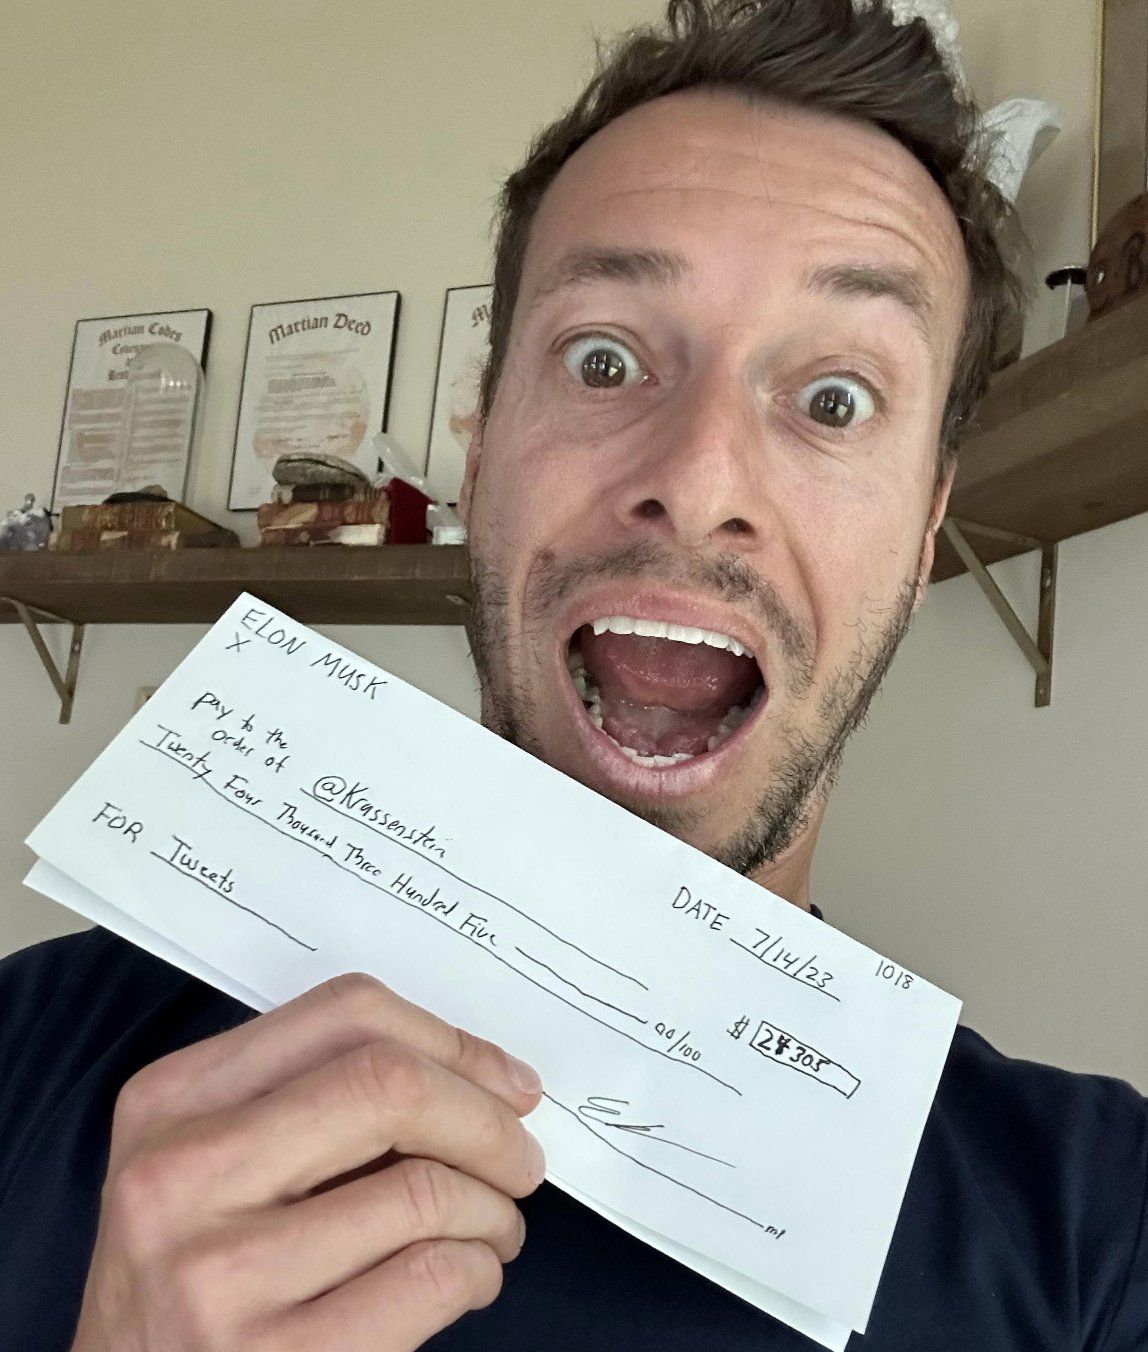 Brian Krassenstein poses with $24,305 "check" from Elon Musk